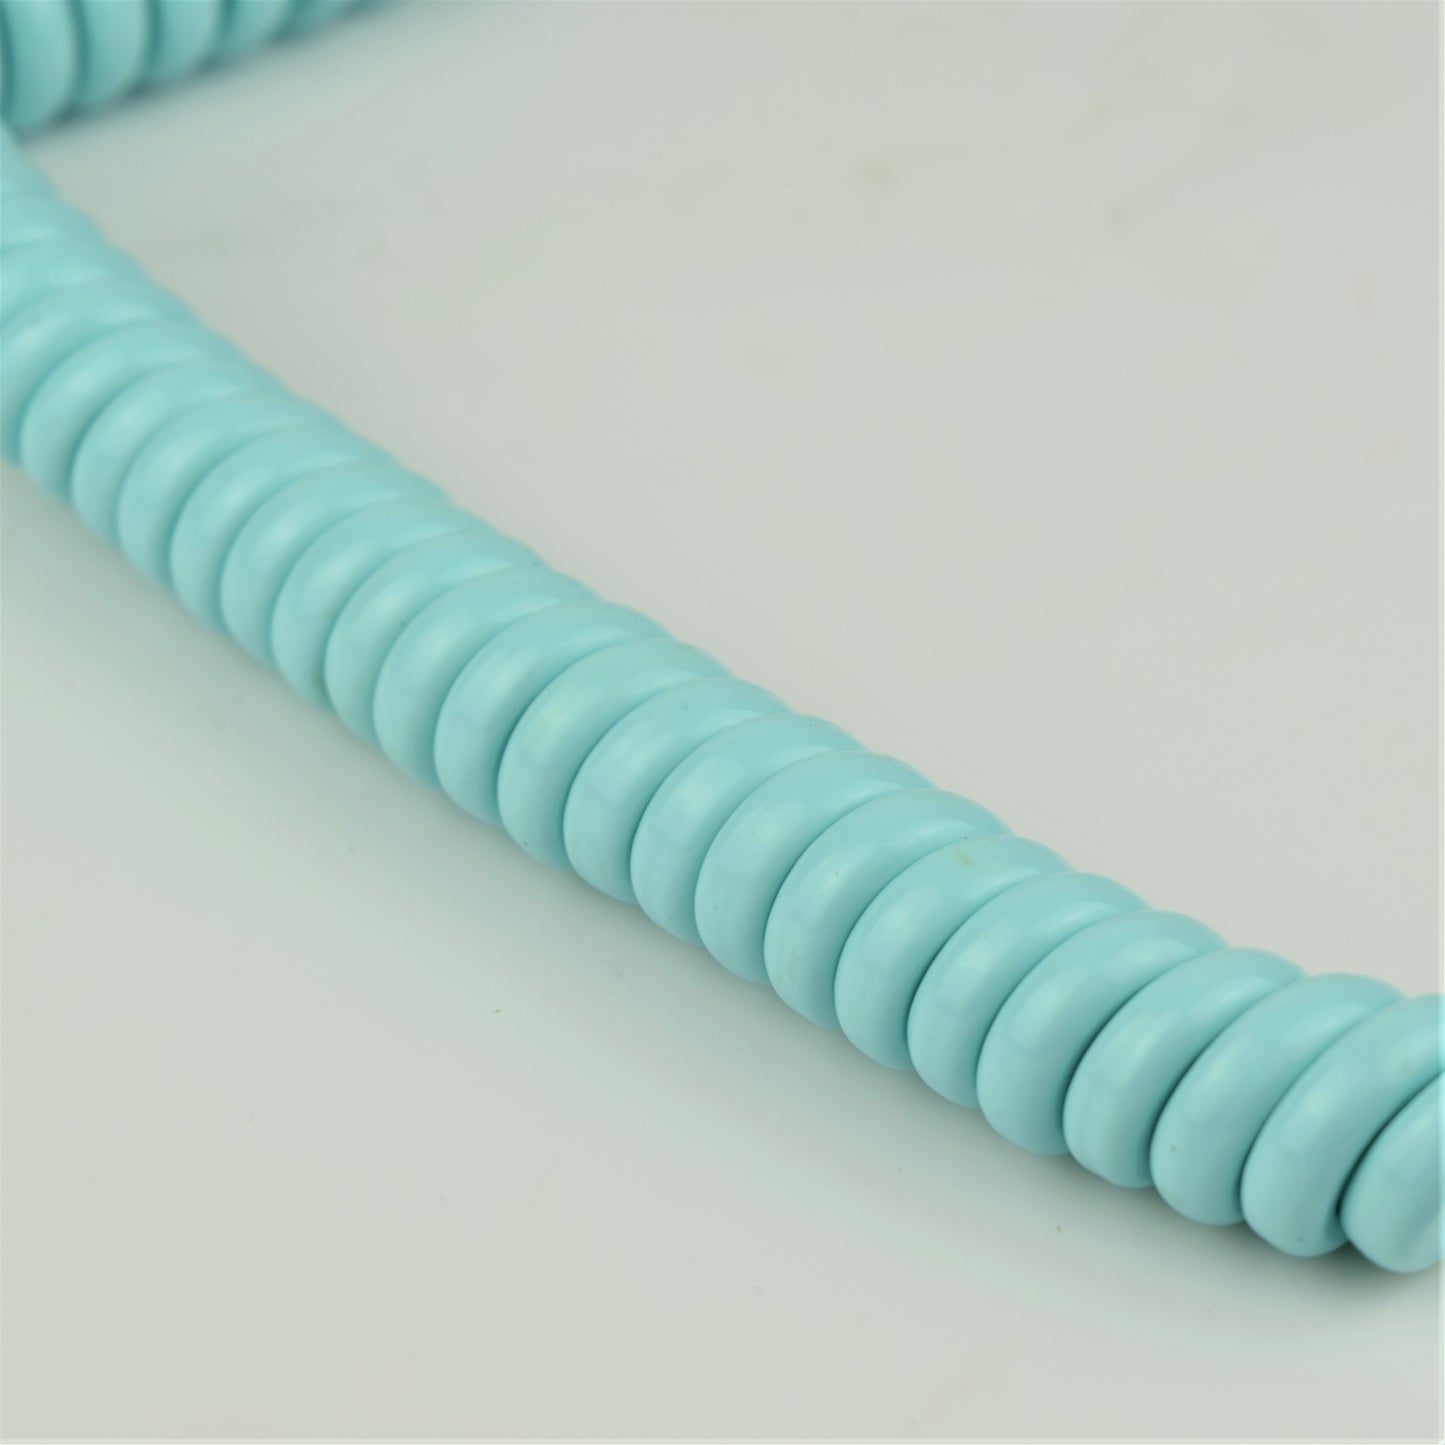 Cord - Handset - Turquoise - Hardwired Curly - 4 Conductor - spade terminations